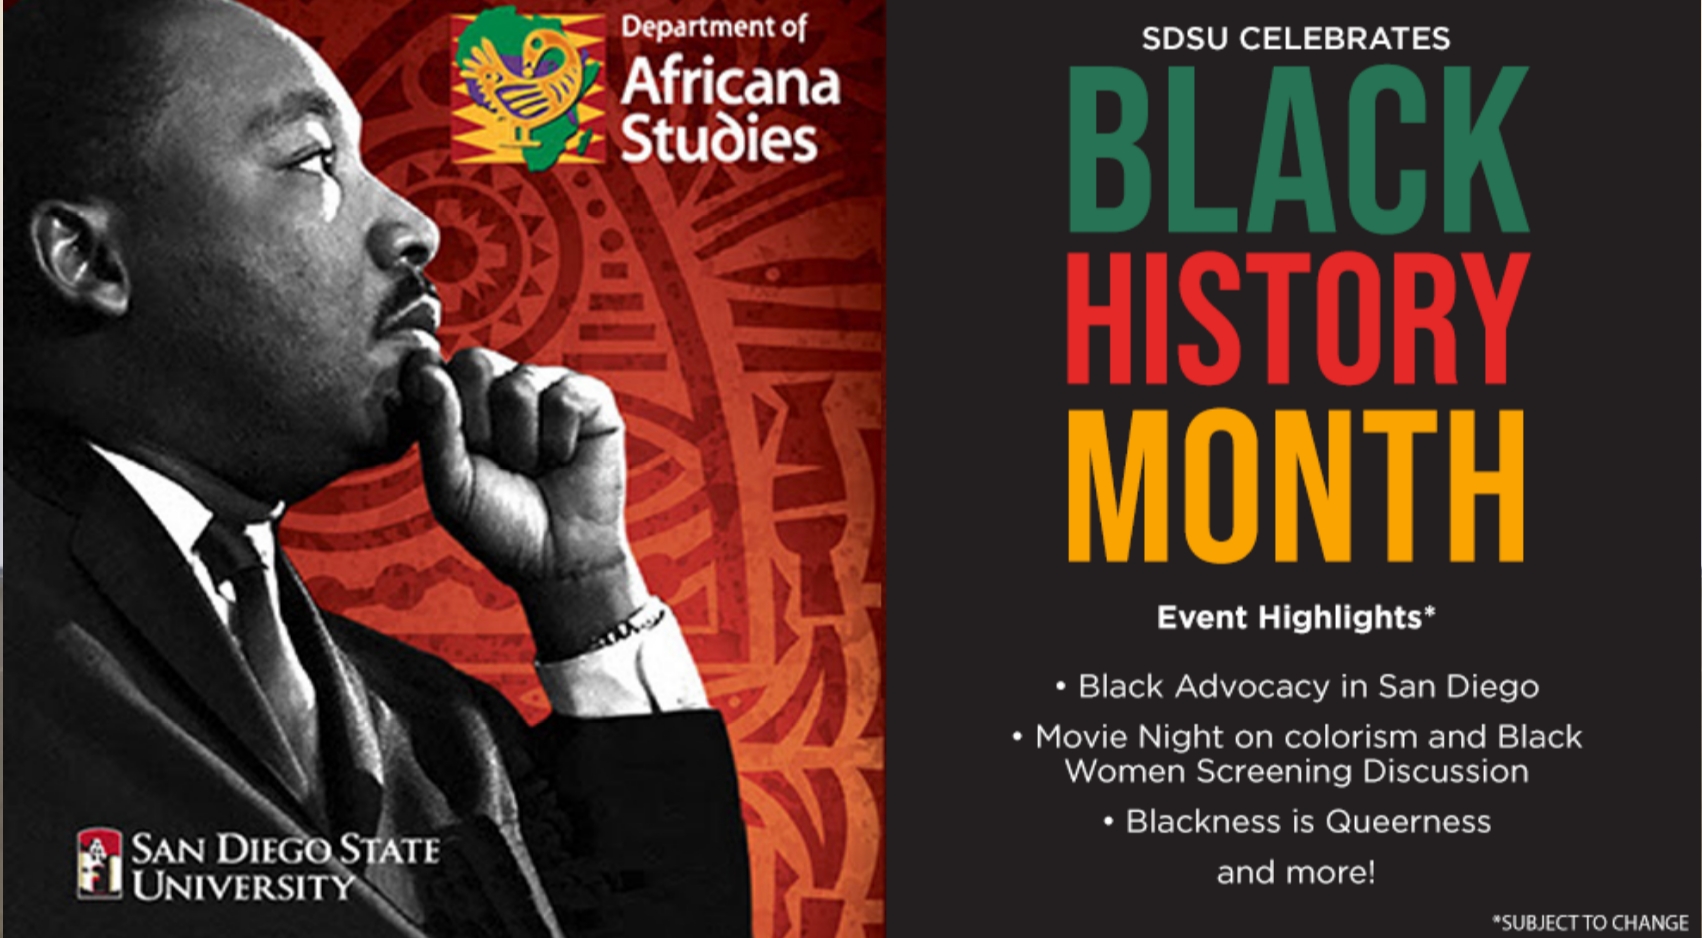 SDSU Black History Month celebrations announcement featuring a photo Dr. Martin Luther King Jr.